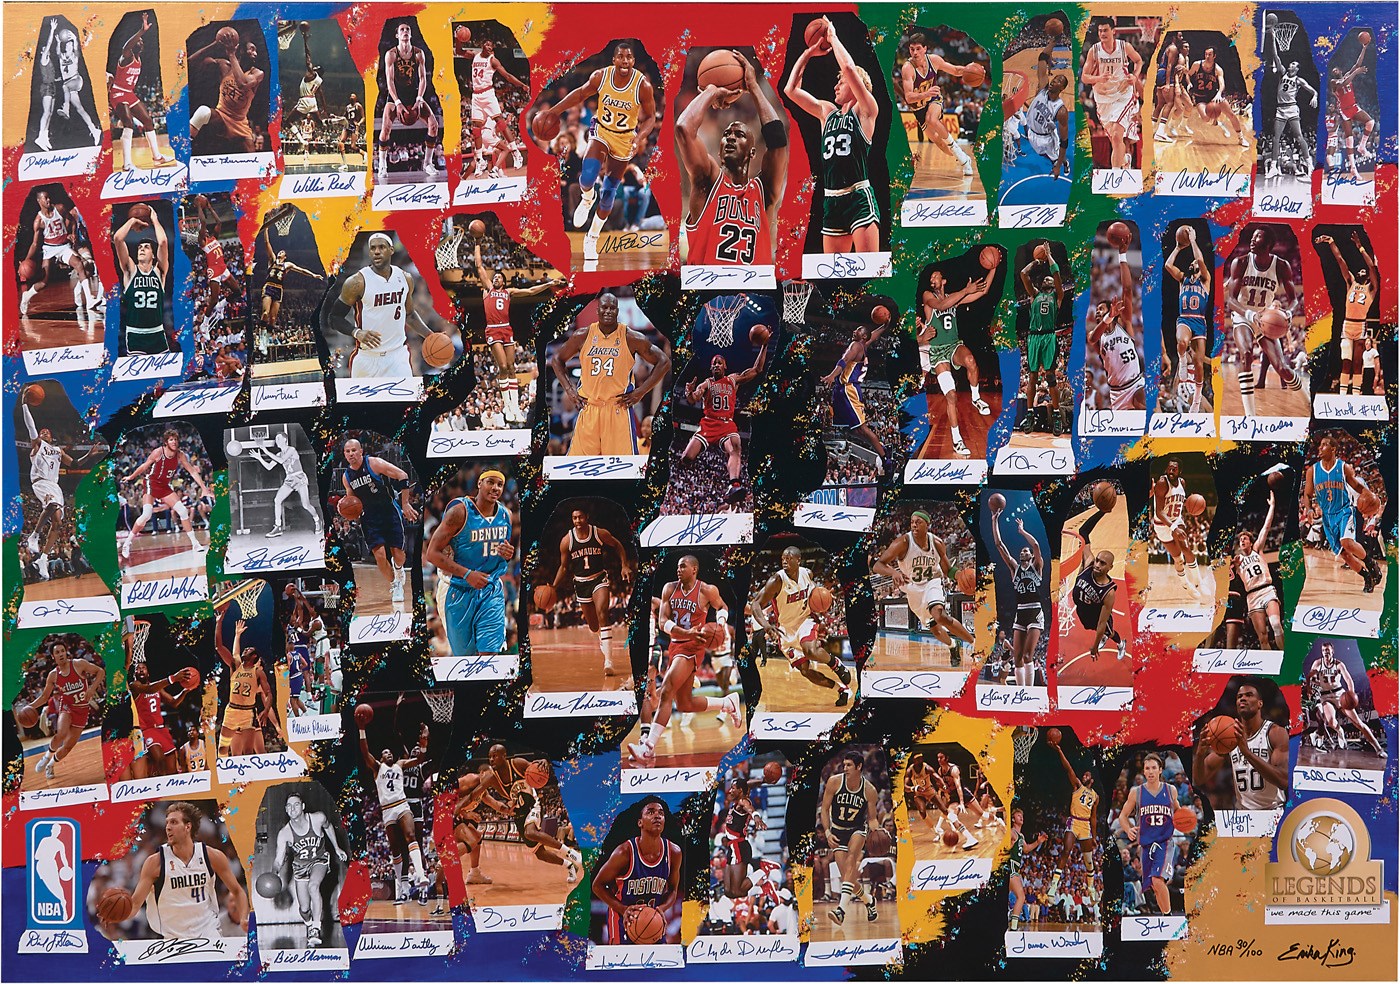 - NBA Legends "We Made This Game" Signed Mixed Media by Erika King (61 Signatures)